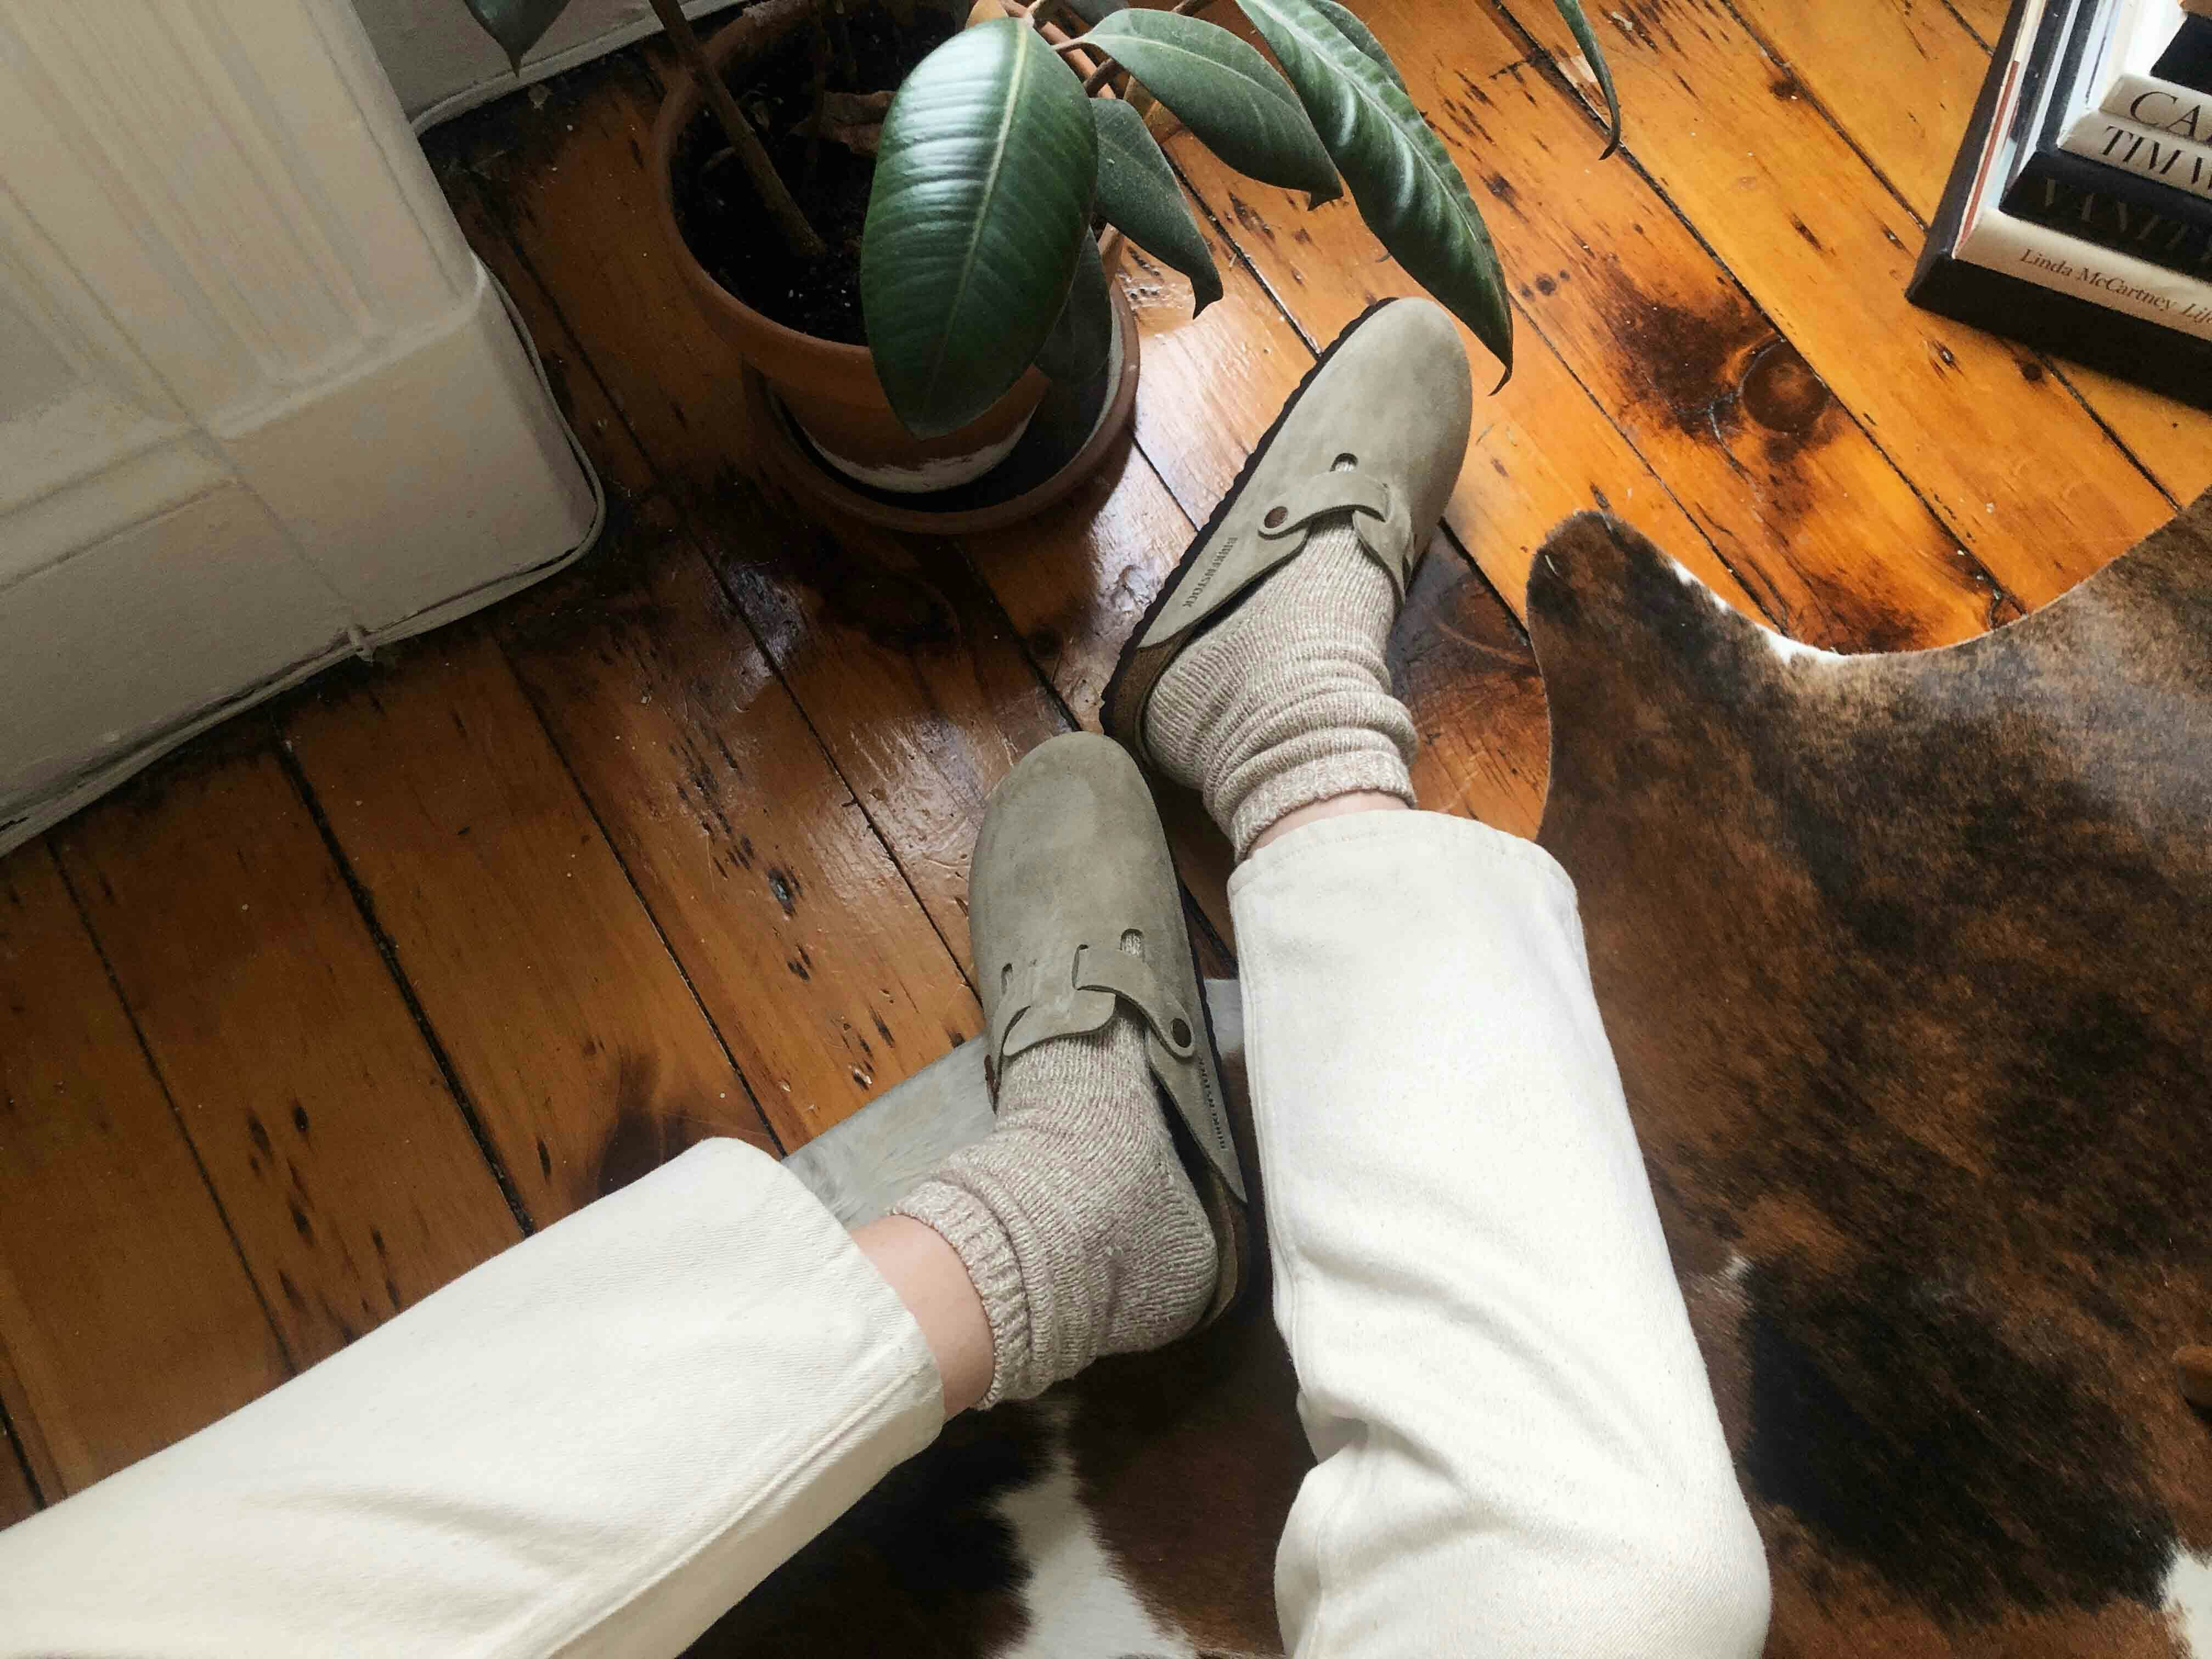 Birkenstock Boston Clogs Are the Shoe of the Summer